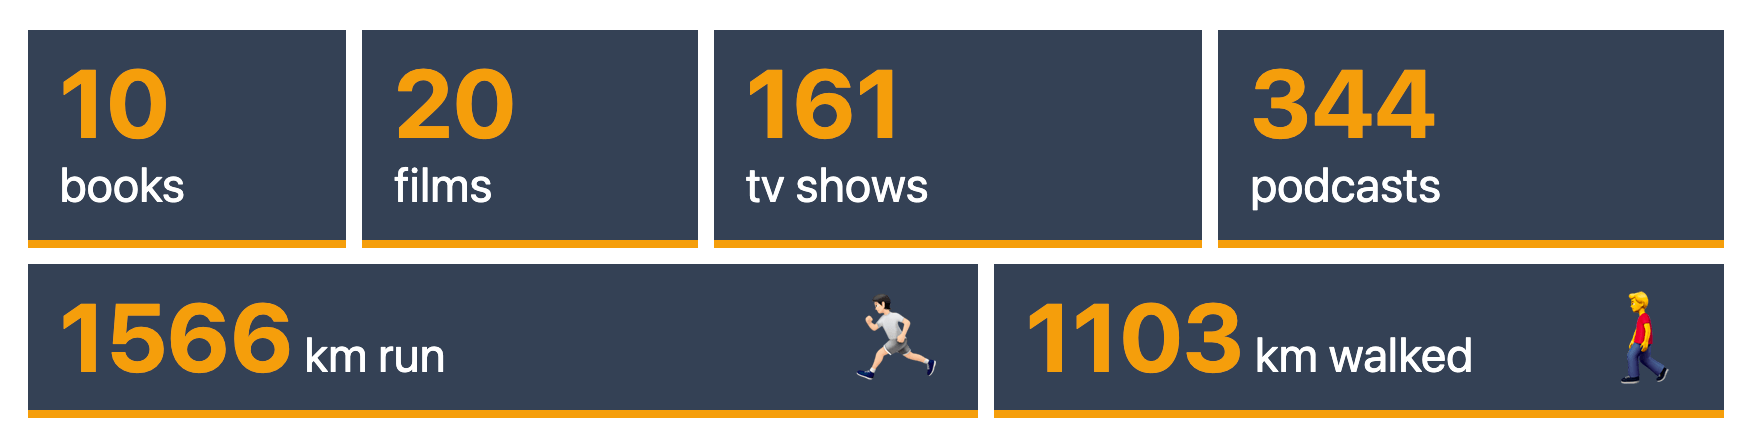 Stats for 2022: 10 books, 20 films, 161 TV shows, 344 podcasts, 1566 km run, 1103 km walked